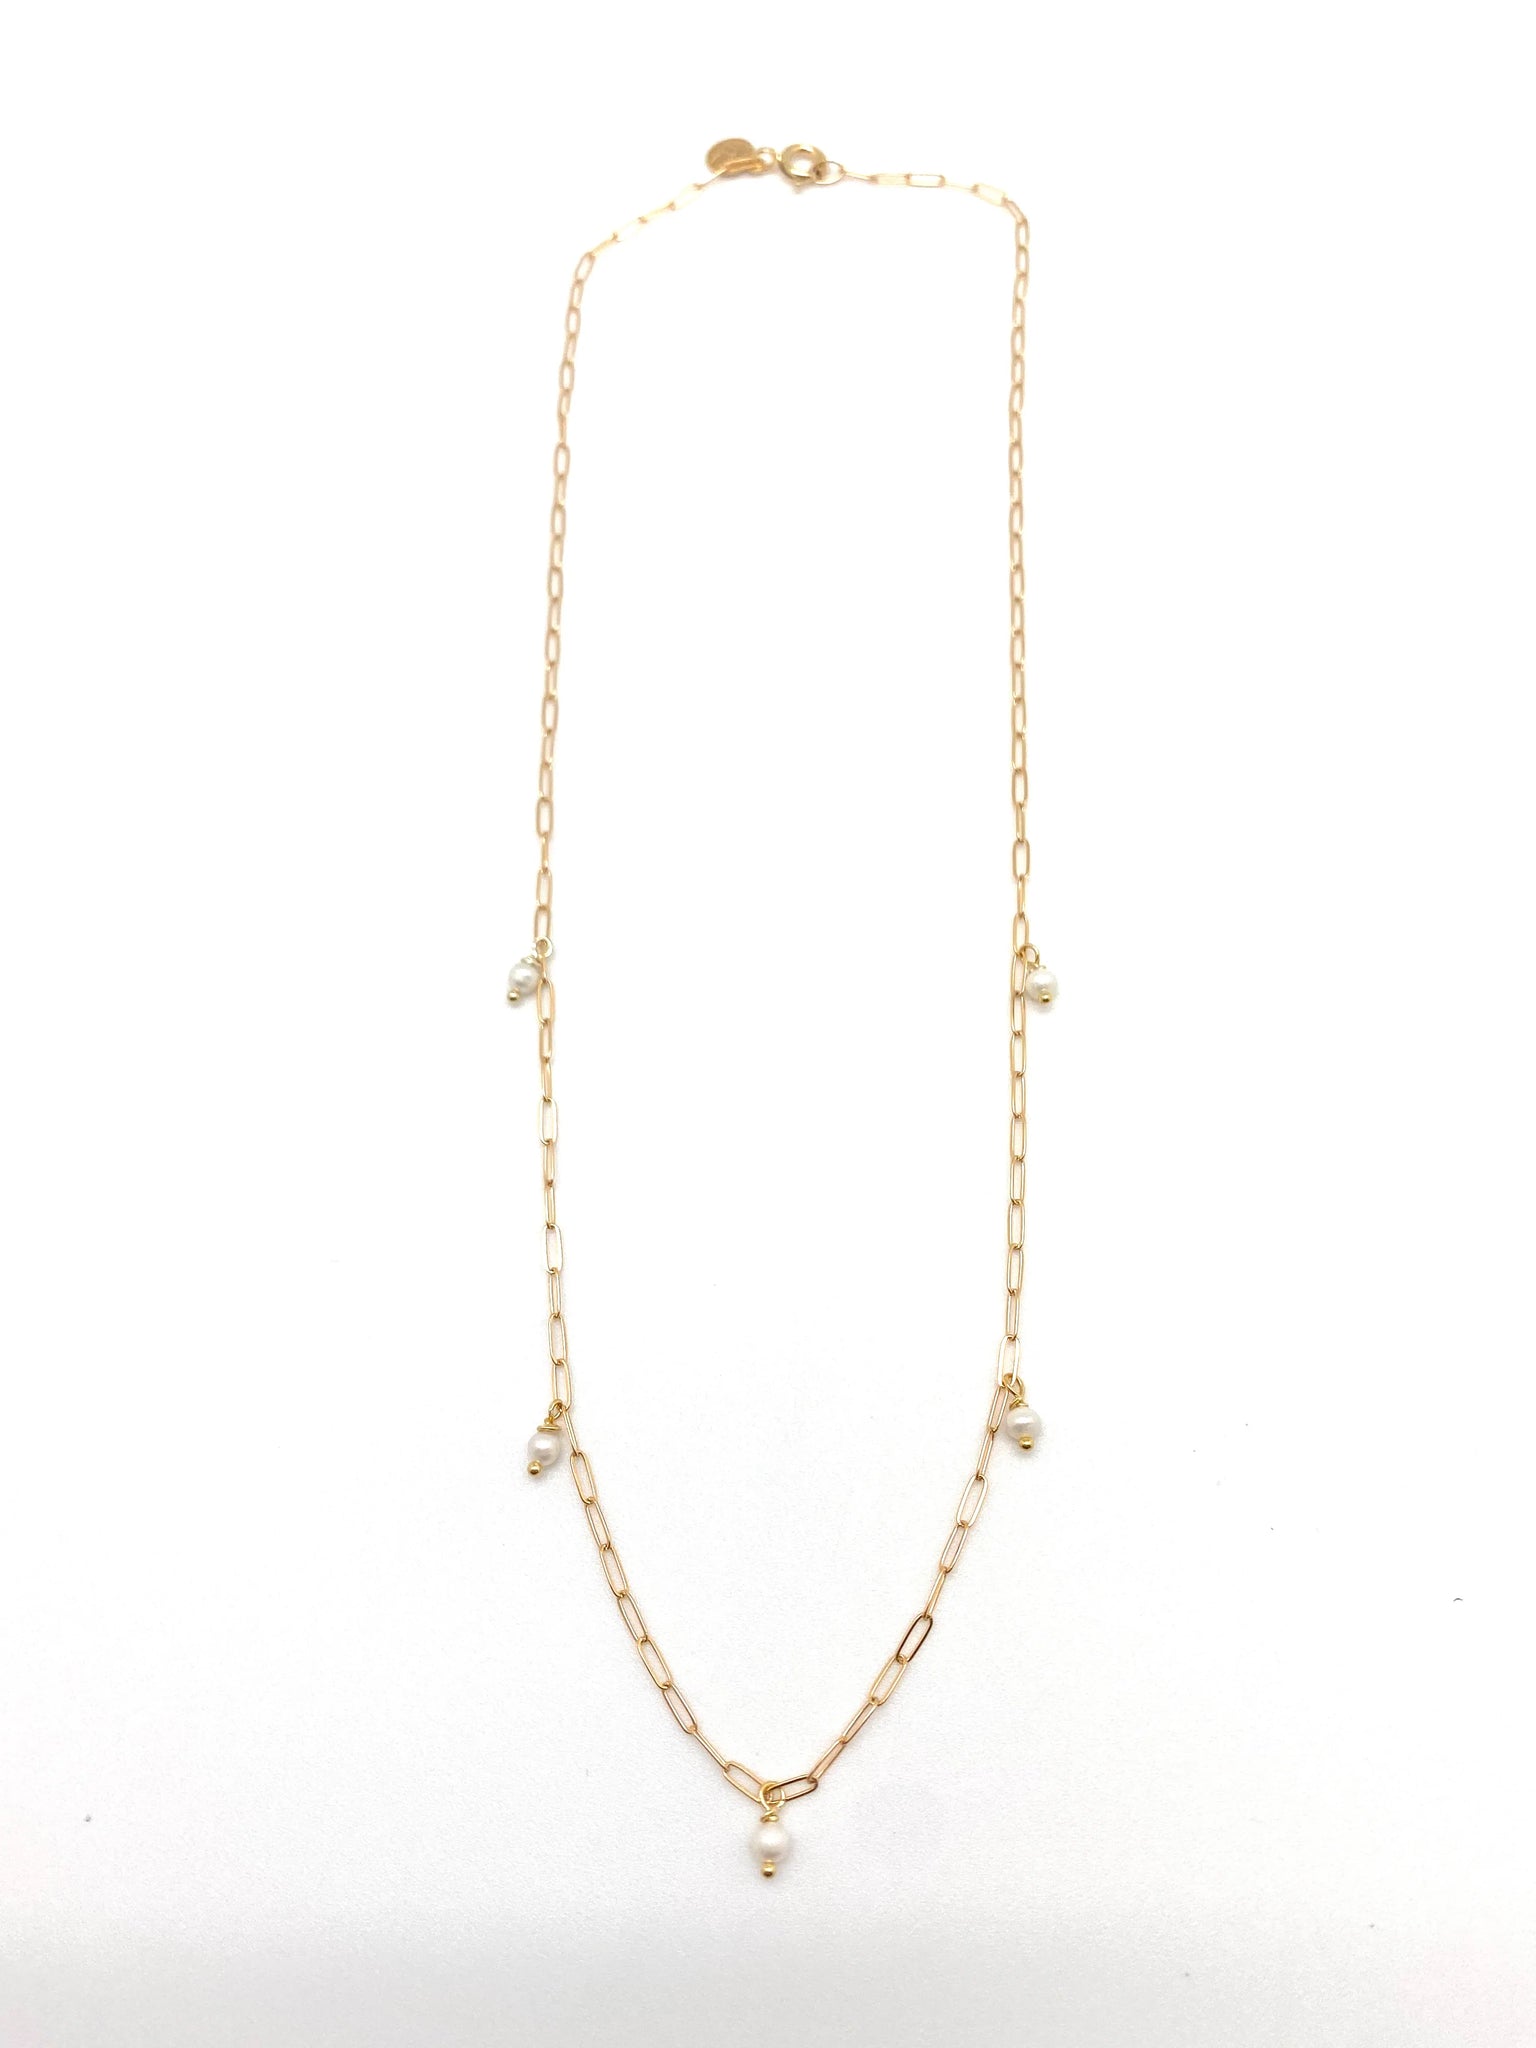 Marie 5 Pearl Necklace in Gold/White